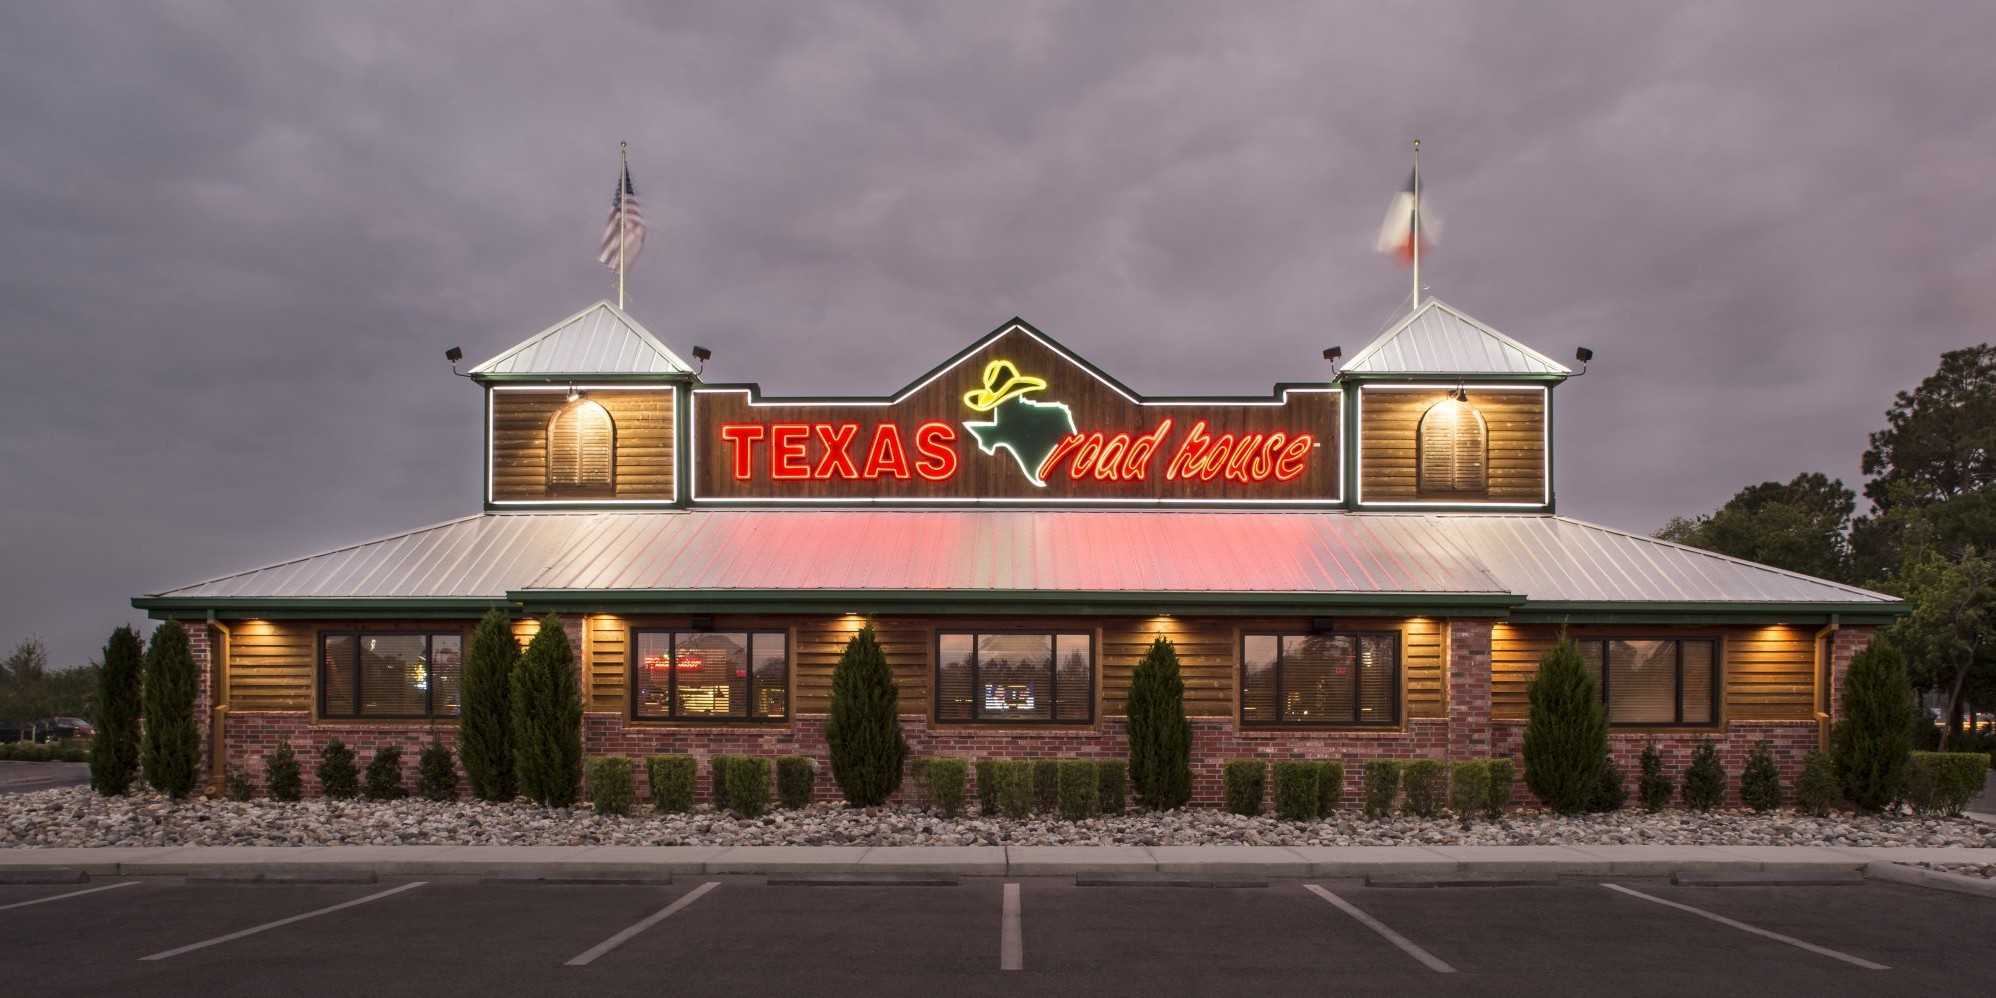 Texas Roadhouse Locations Near Me | United States Maps